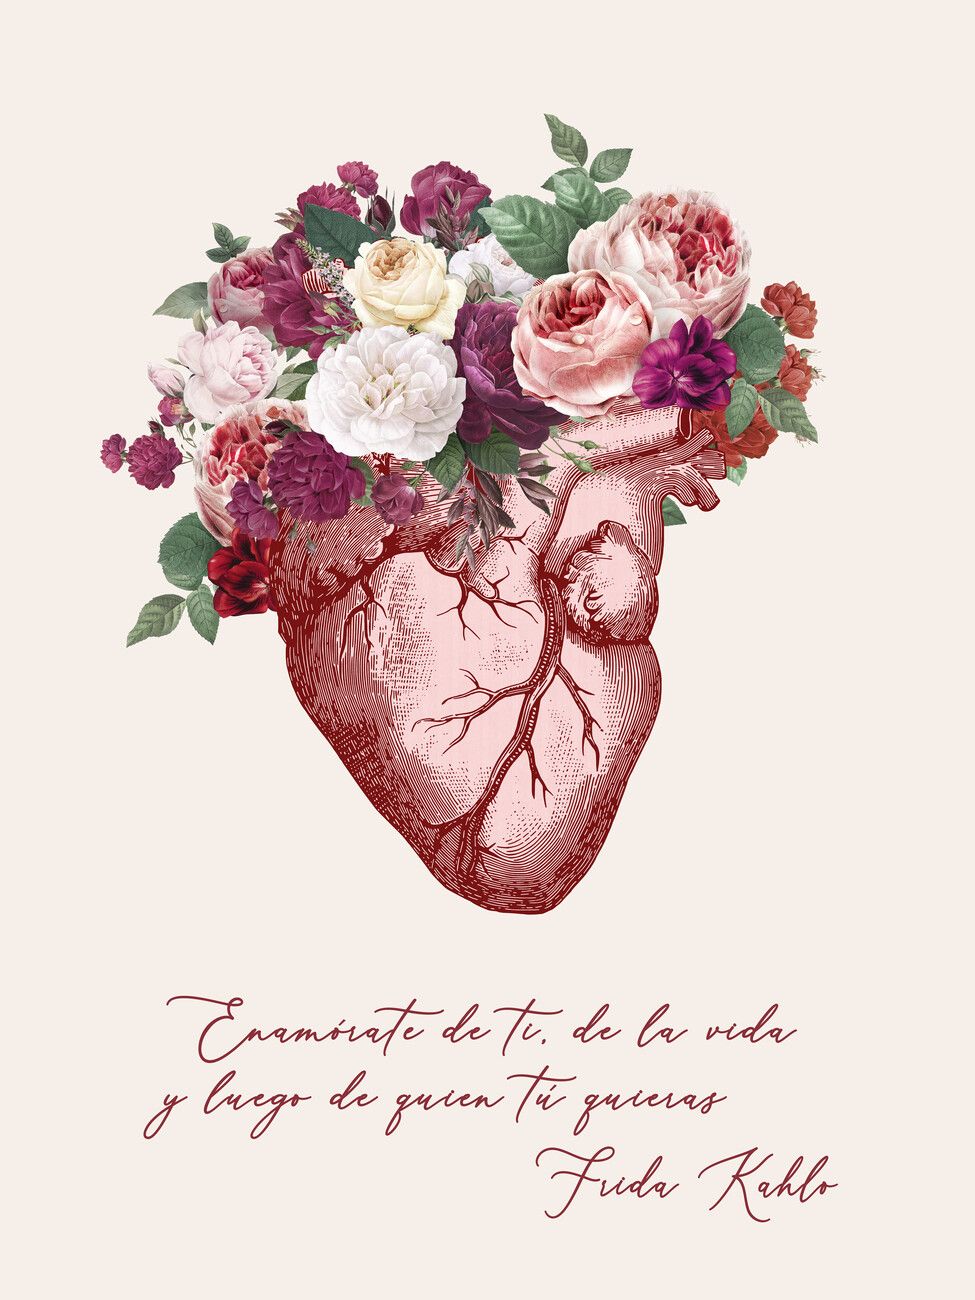 A drawing of a heart with flowers on top of it and Frida Kahlo's quote underneath it. - Frida Kahlo